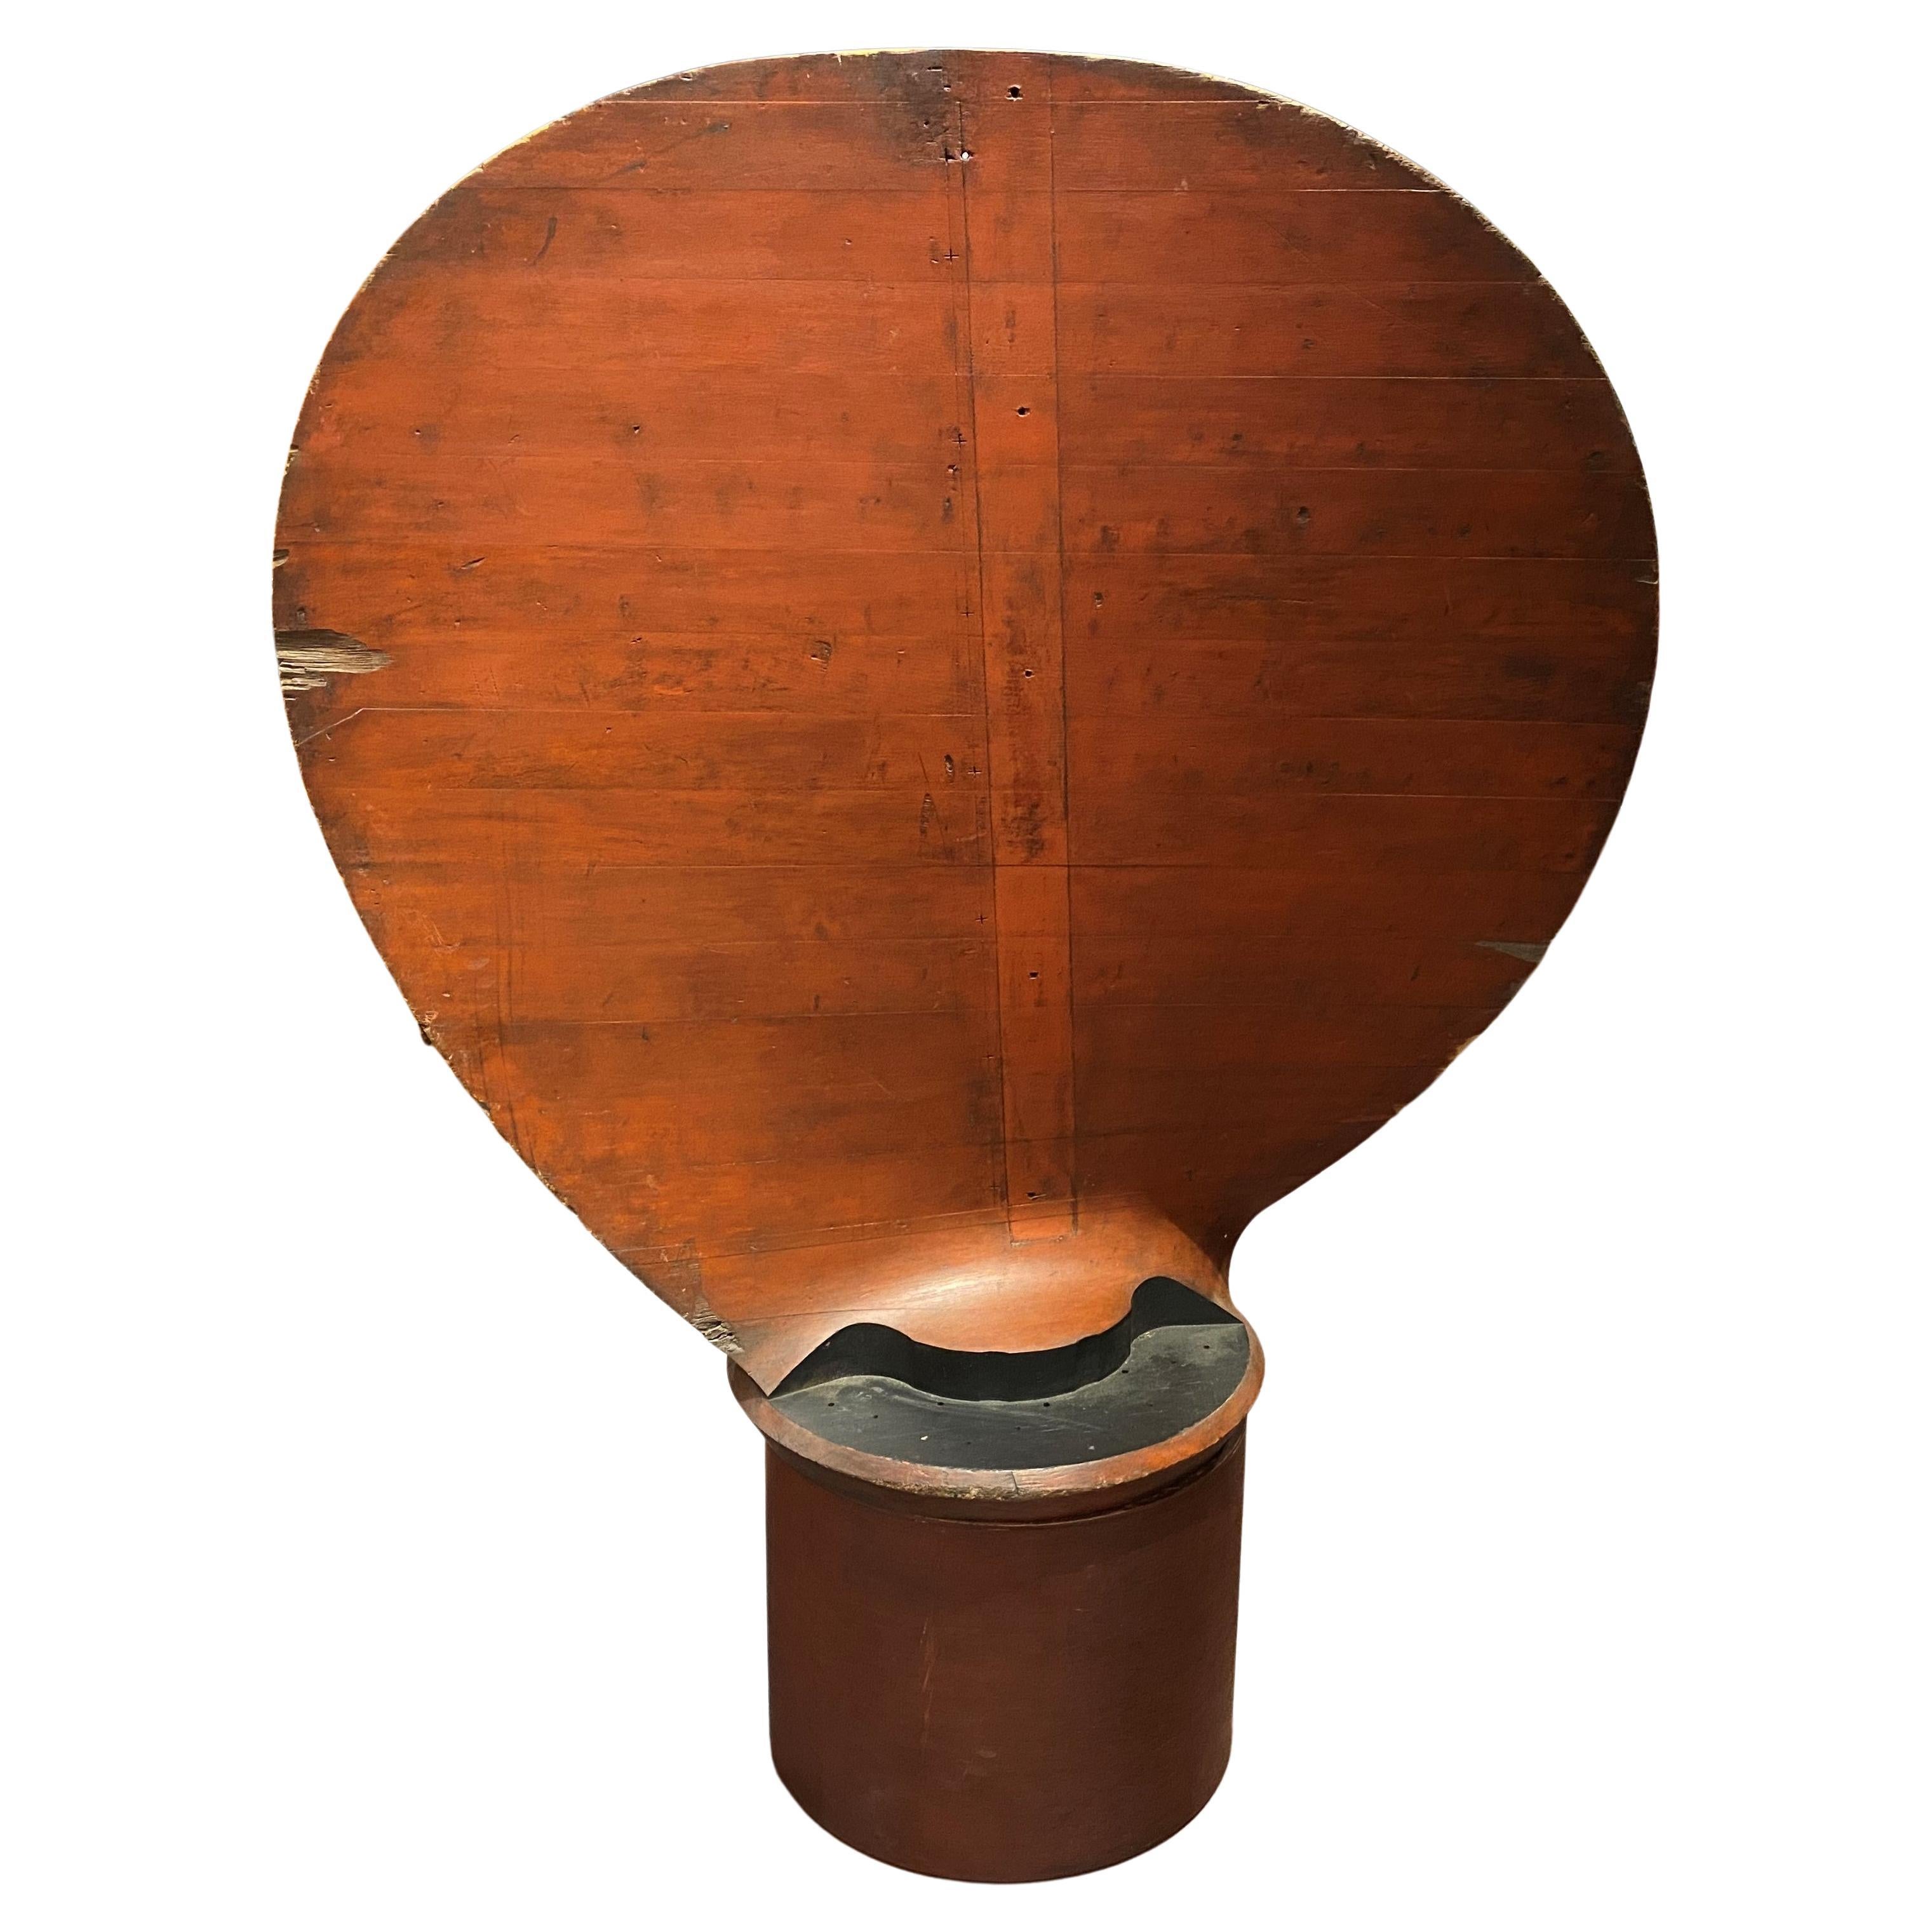 Large Wooden Ship’s Propeller Blade Foundry Casting Mold on Plinth For Sale